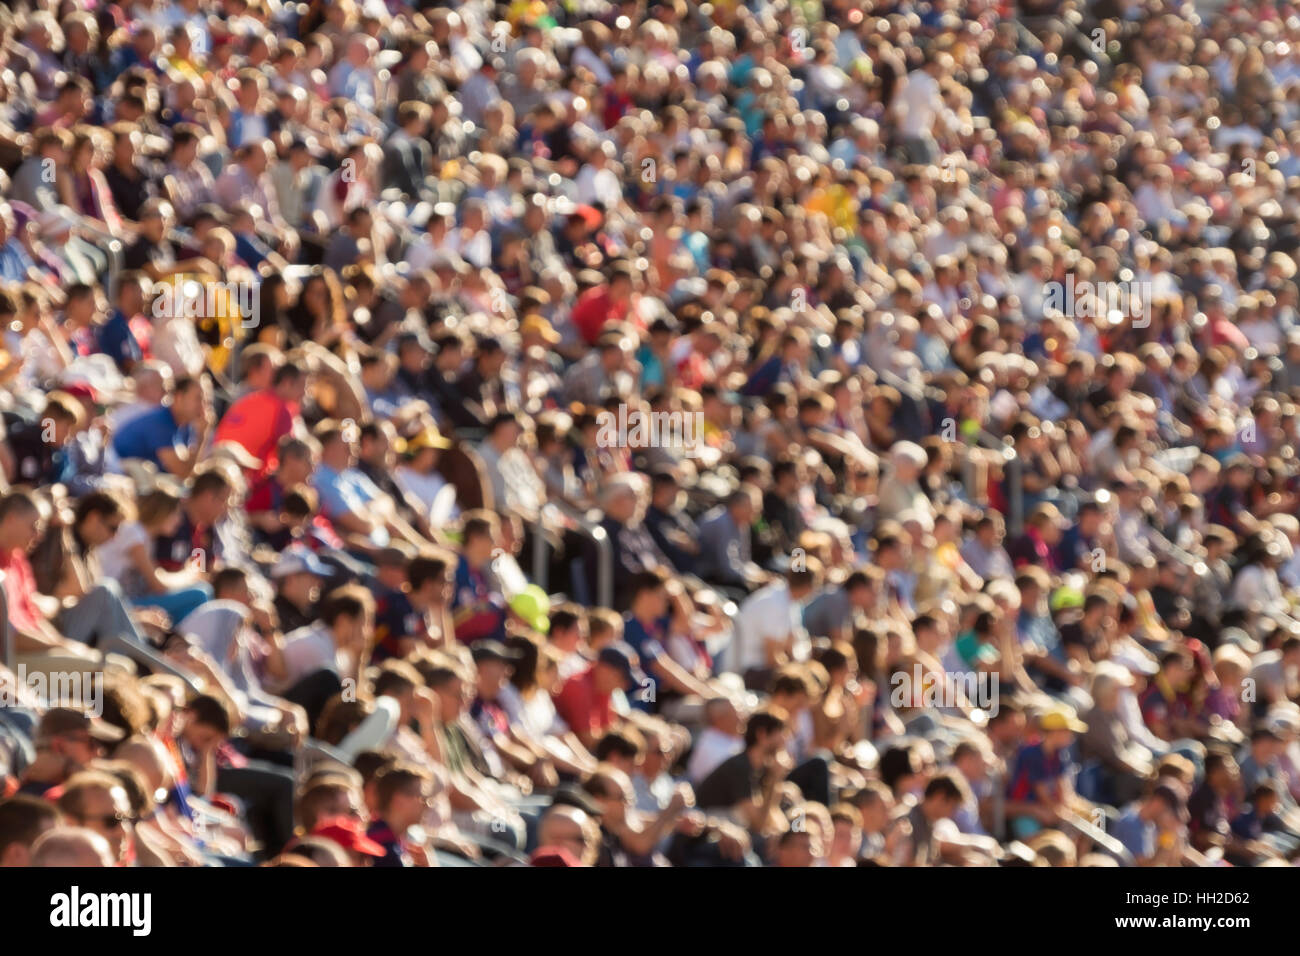 Blurred out people attending an event at an outdoor stadium Stock Photo